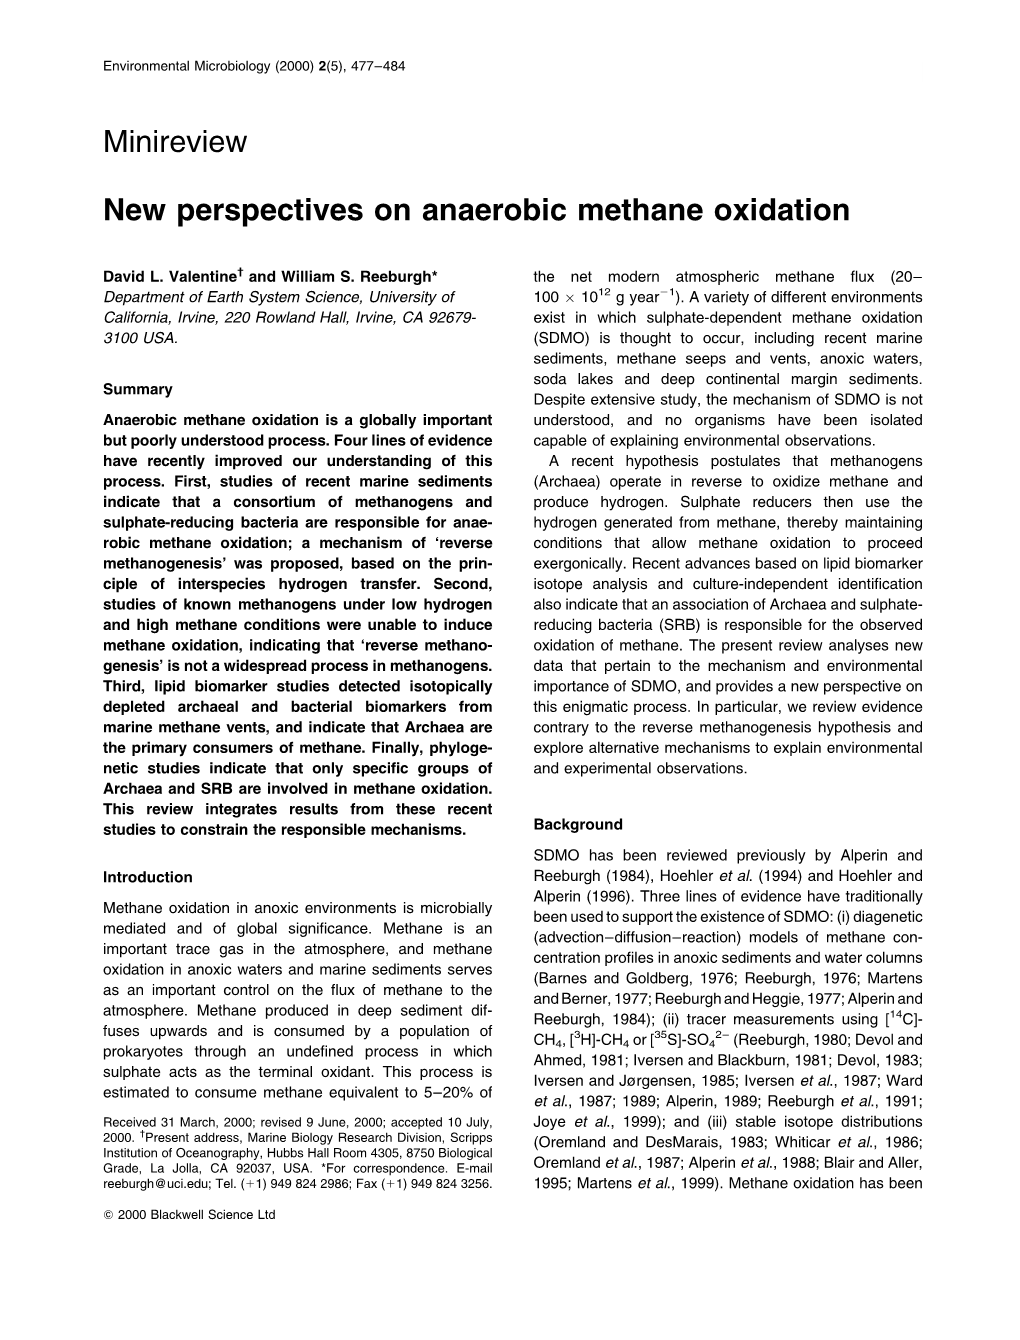 Minireview New Perspectives on Anaerobic Methane Oxidation